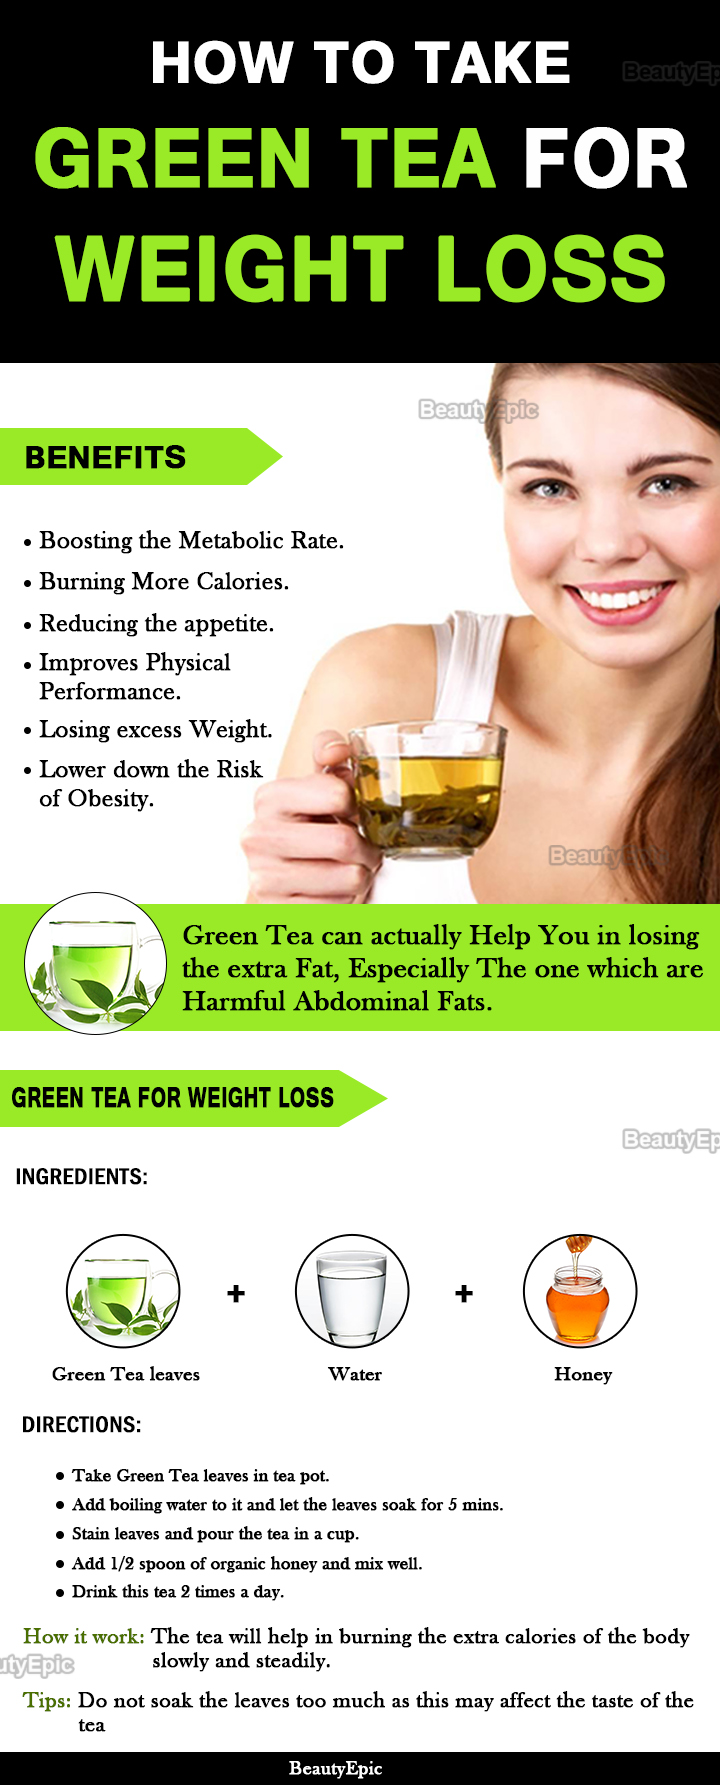 How to Take Green Tea for Weight Loss?